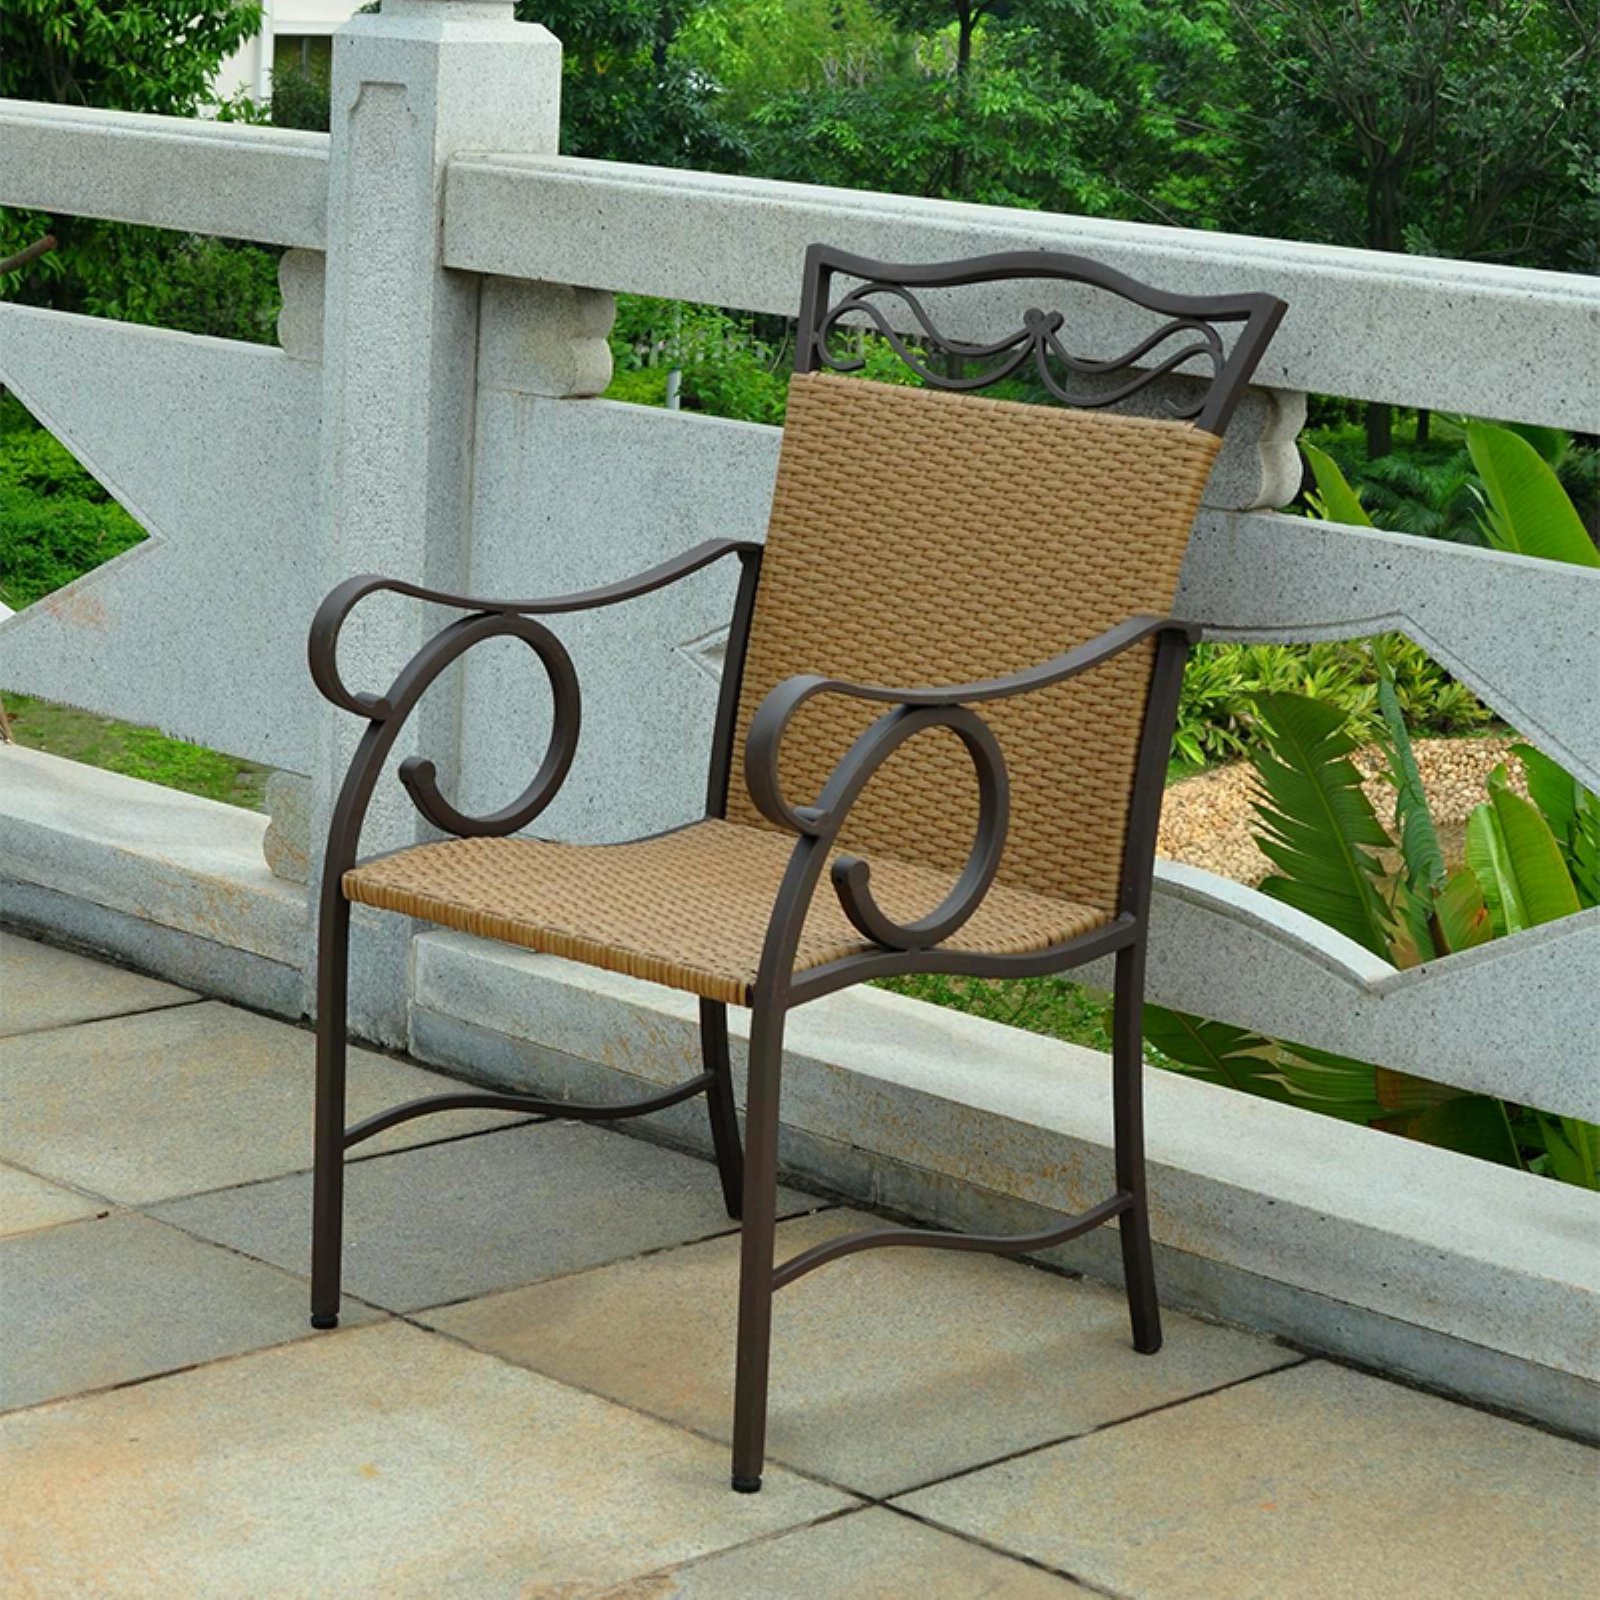 International Caravan Valencia All-Weather Wicker Patio Dining Chair - Set of 2 - image 2 of 2